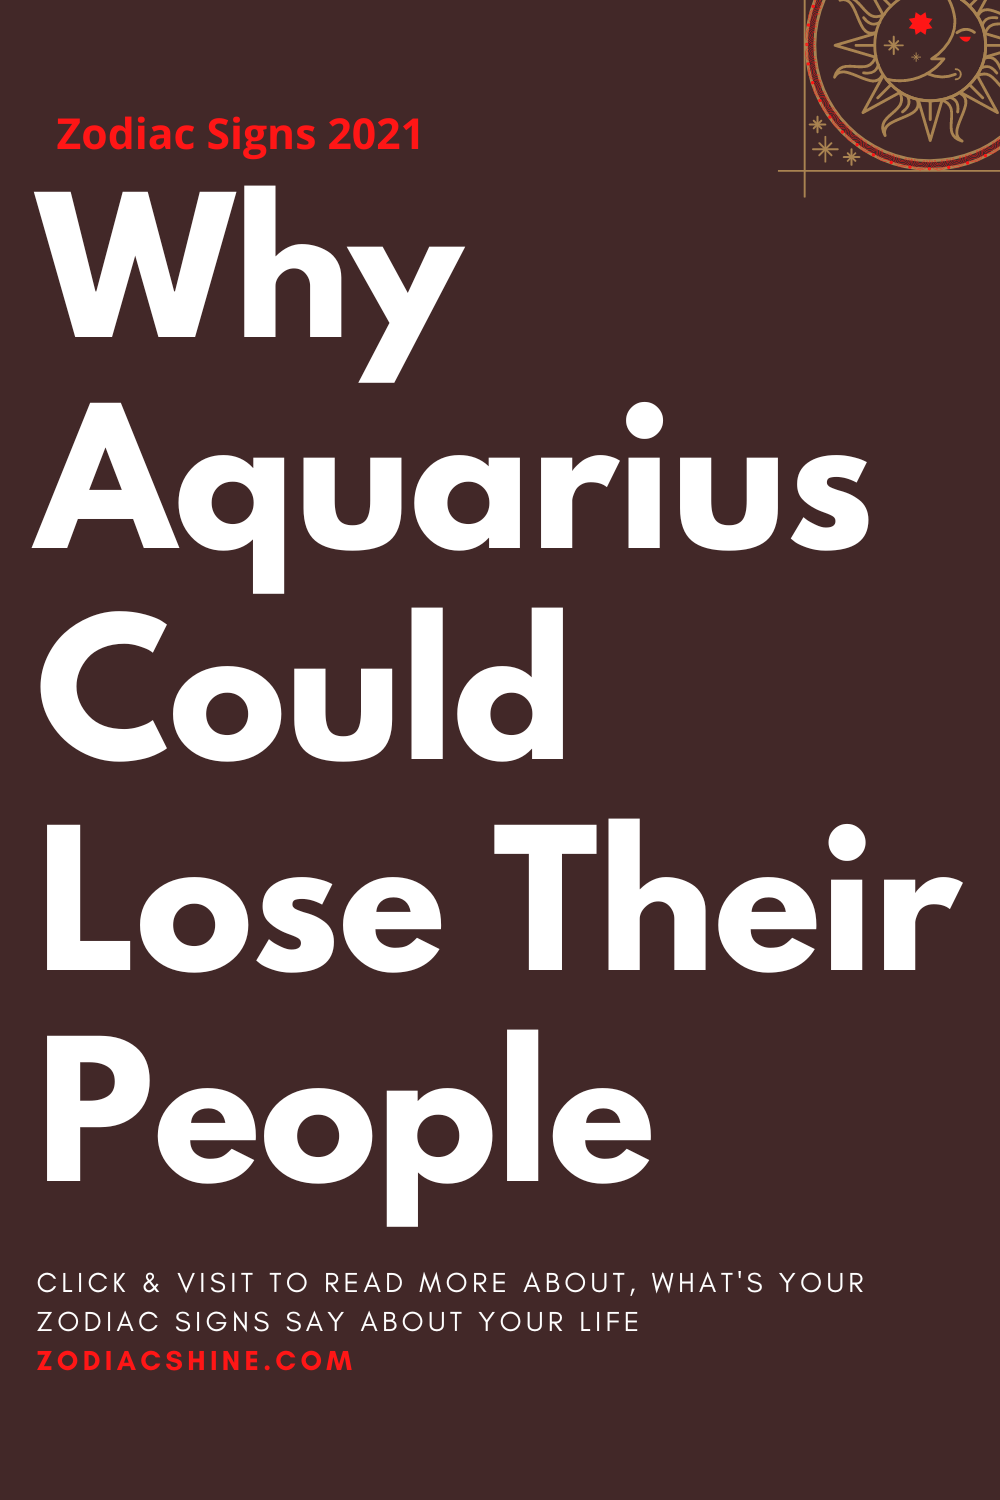 Why Aquarius Could Lose Their People